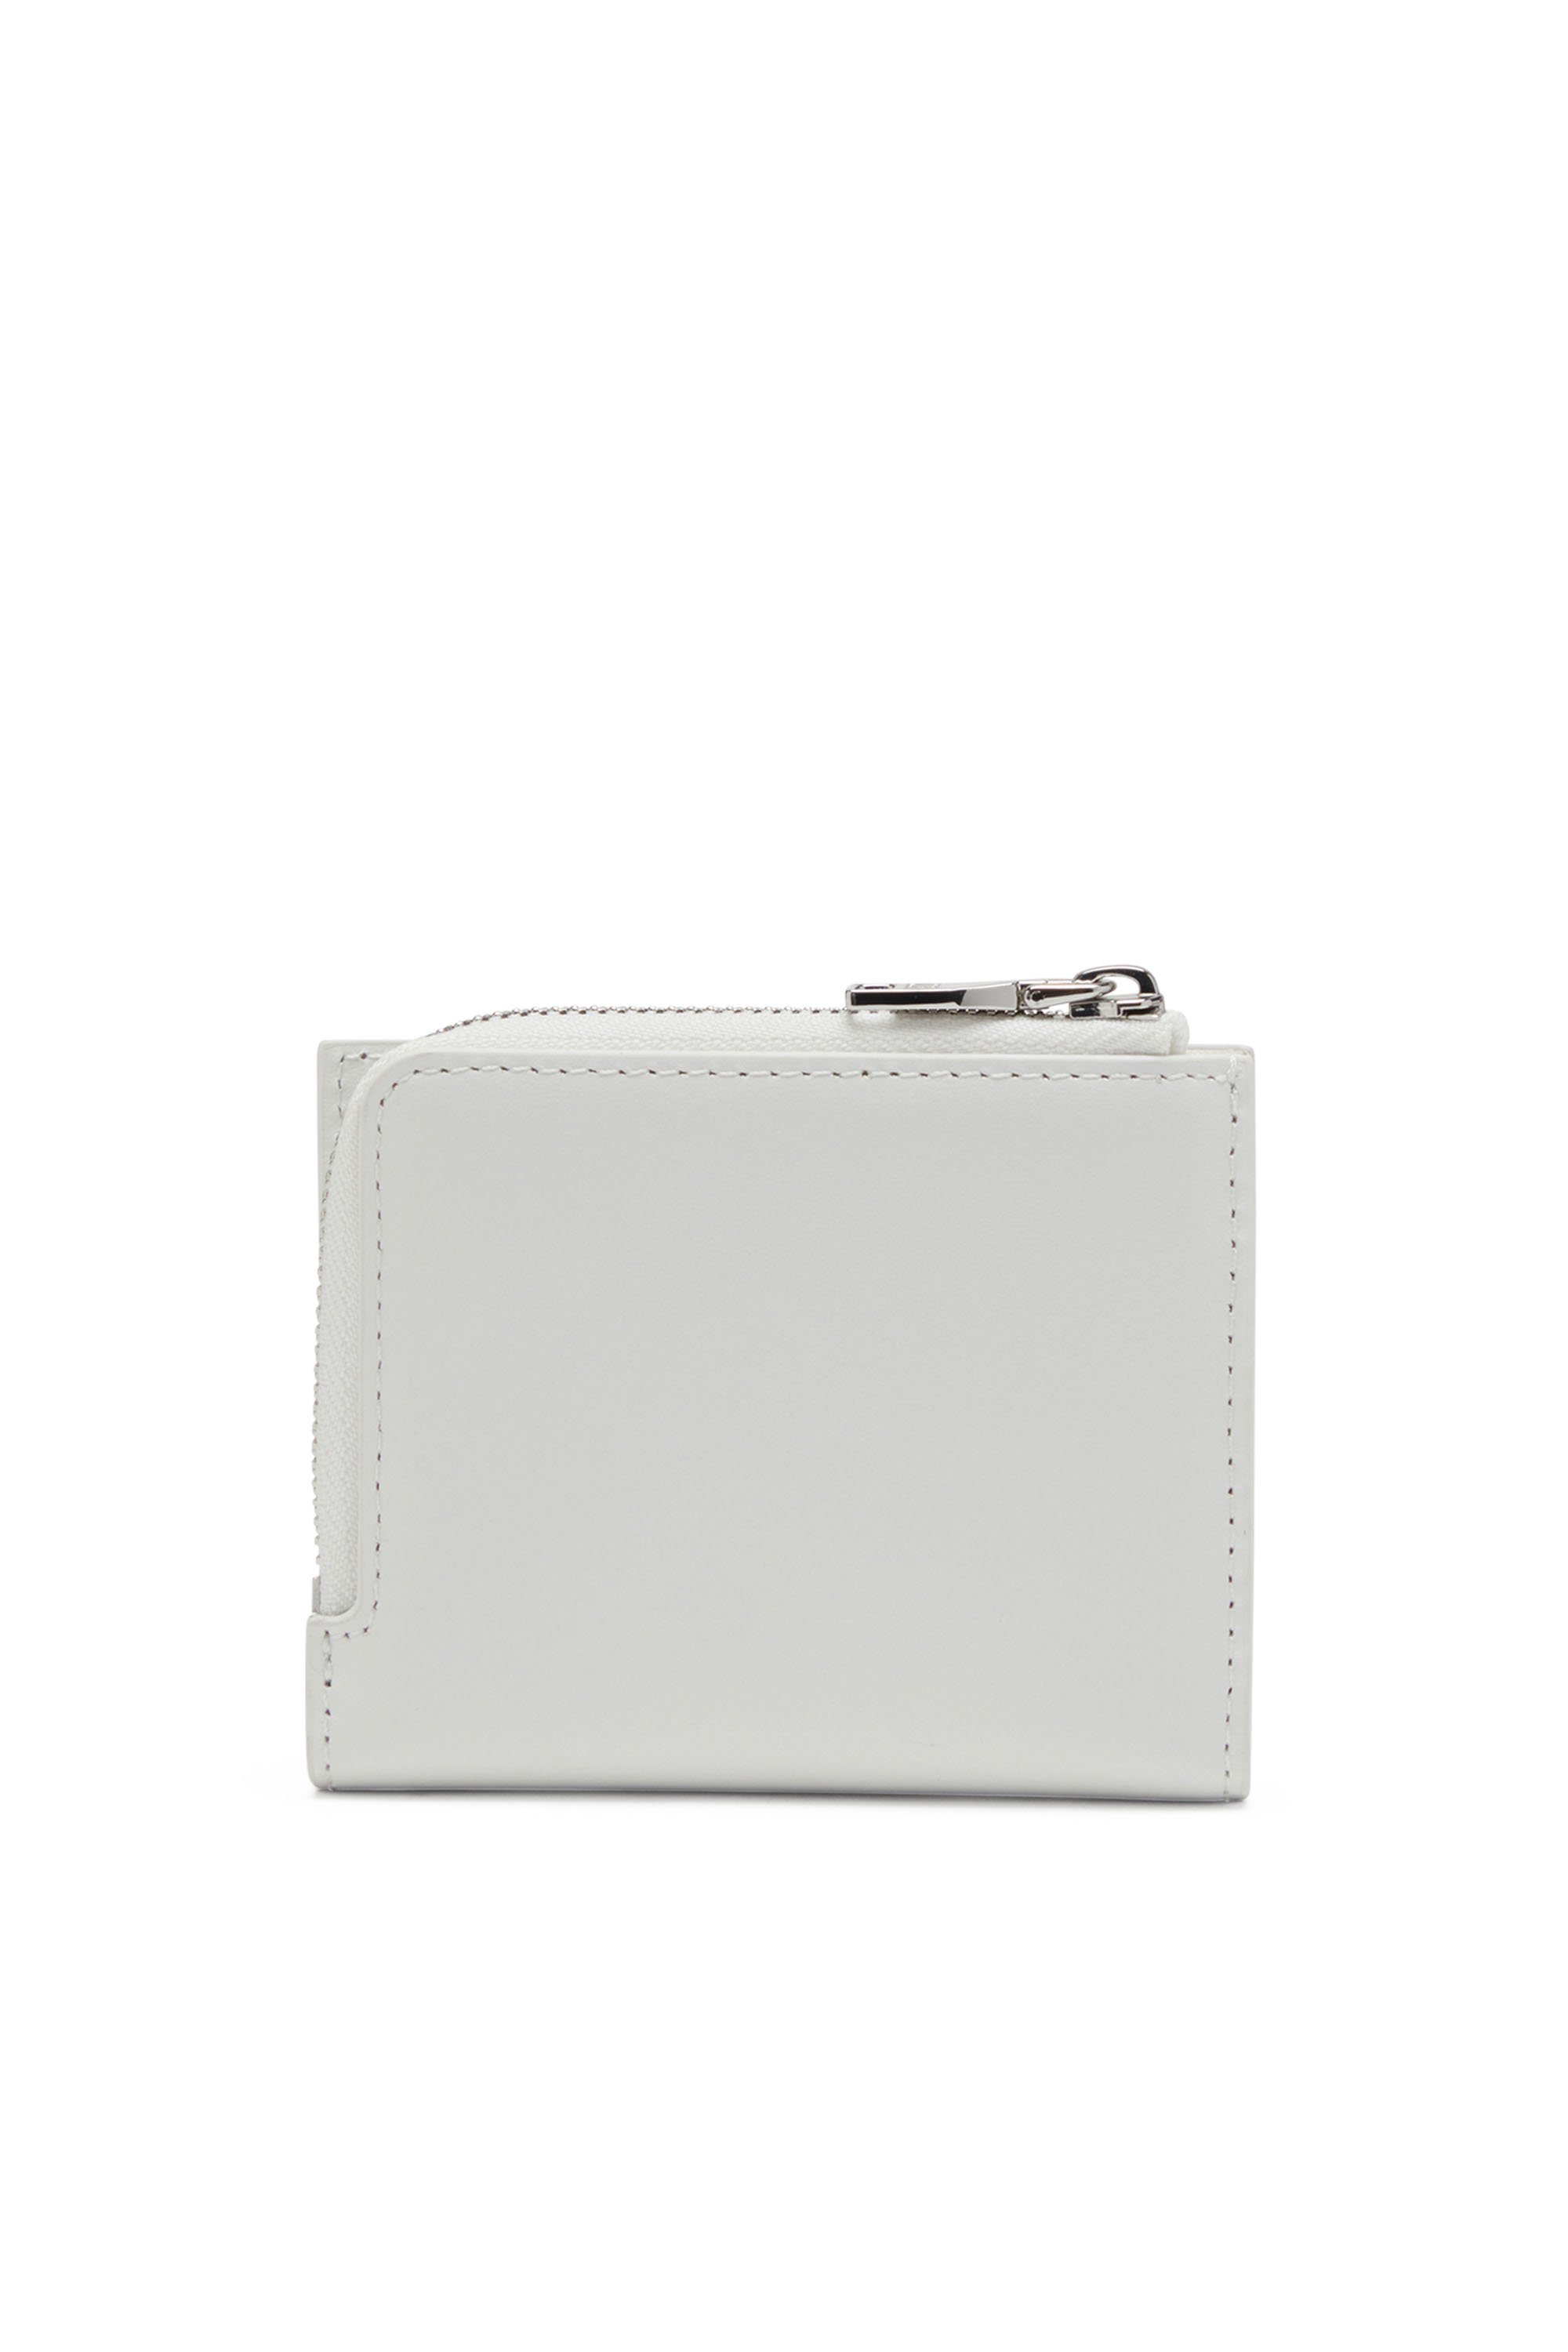 Diesel - 1DR CARD HOLDER ZIP L, Donna Portacarte a libro in nappa in Bianco - Image 2